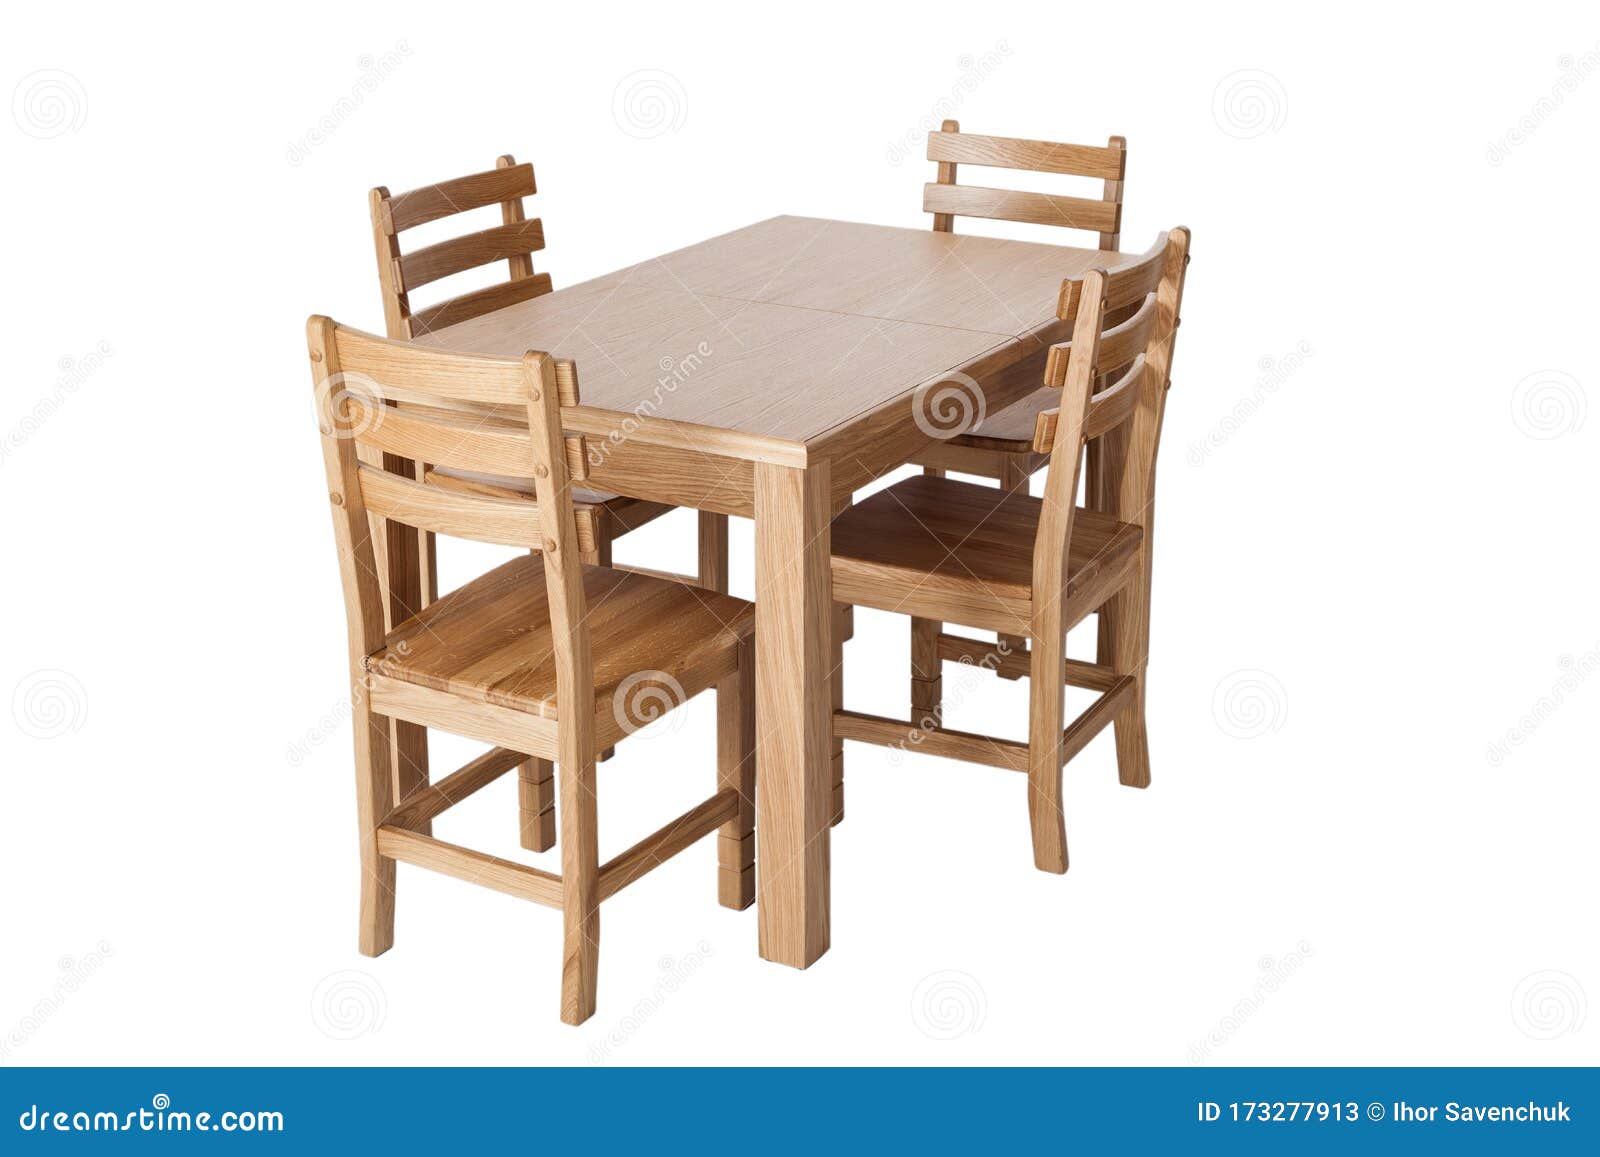 A Set Of Kitchen Furniture Made Of Natural Wood A Dining Table And Four Chairs Isolated On The White Background Stock Image Image Of Background Classic 173277913